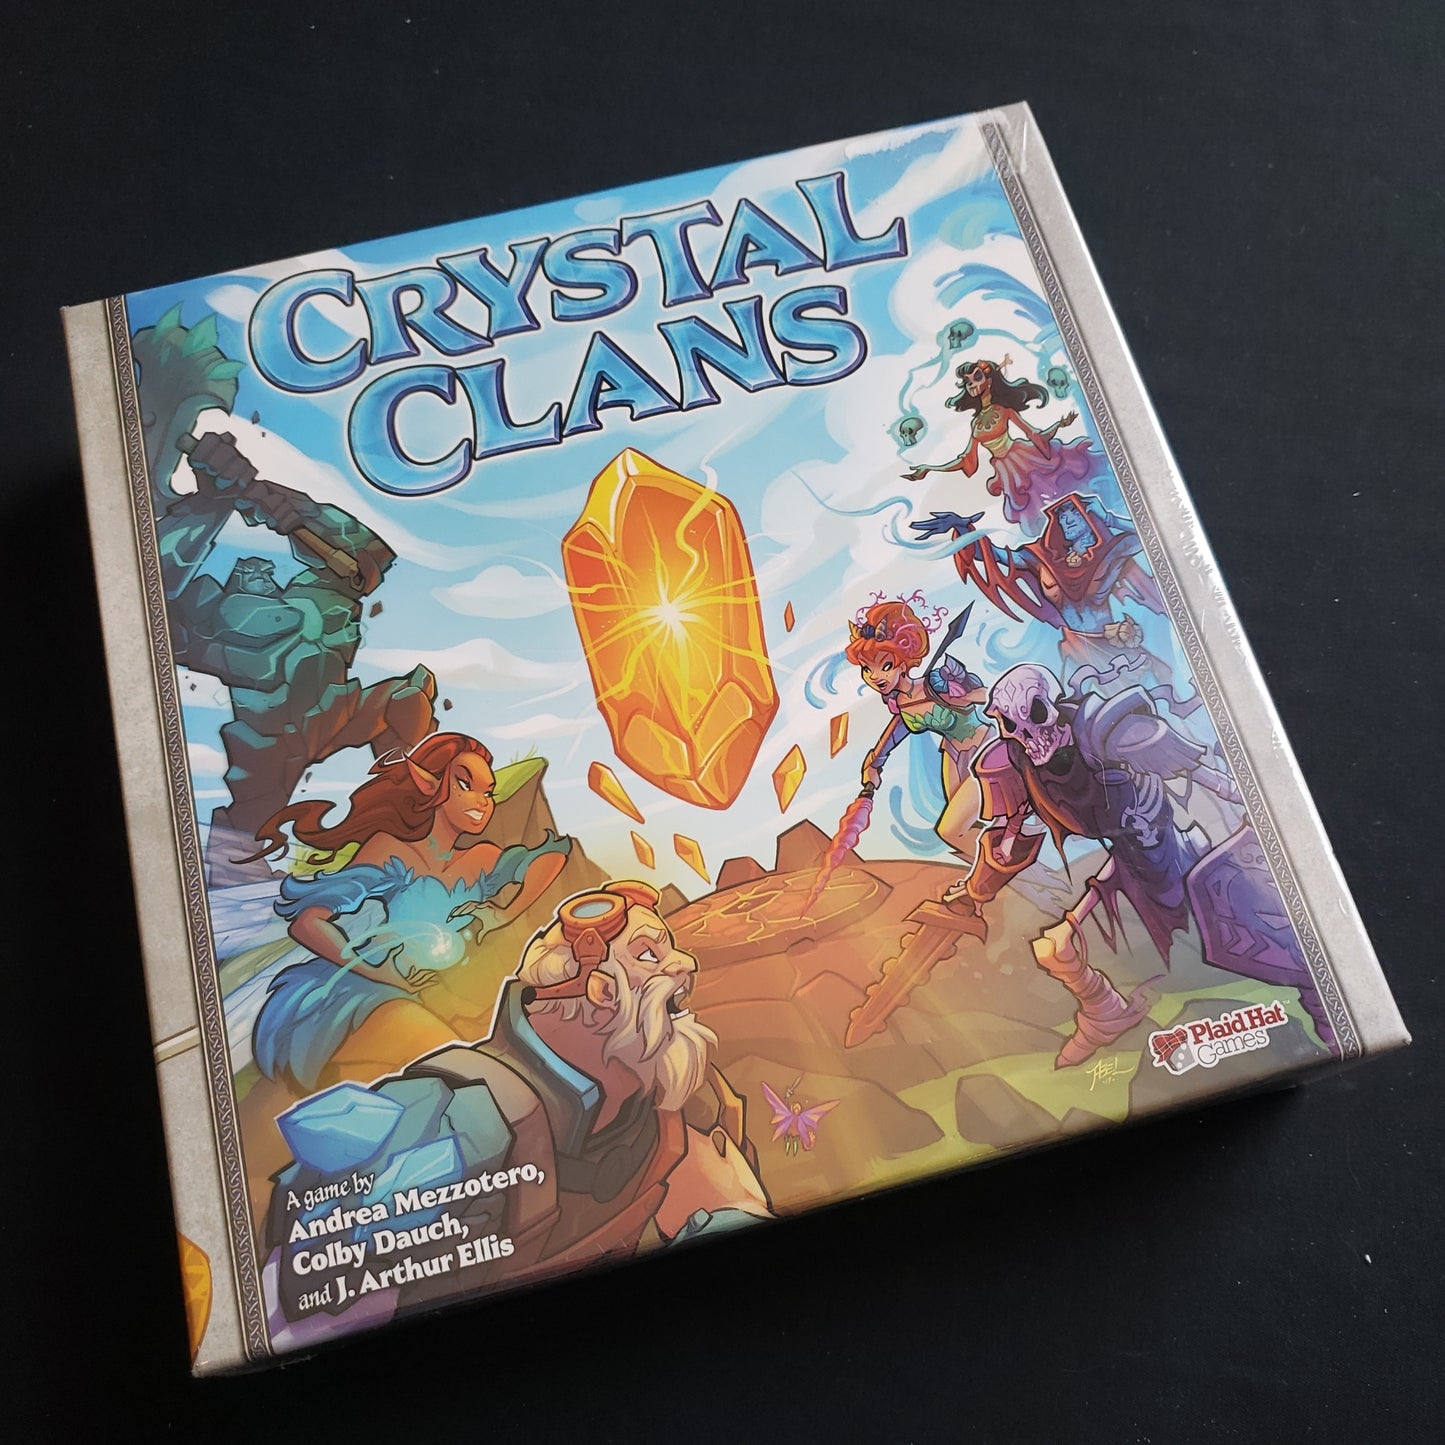 Image shows the front cover of the box of the Crystal Clans card game